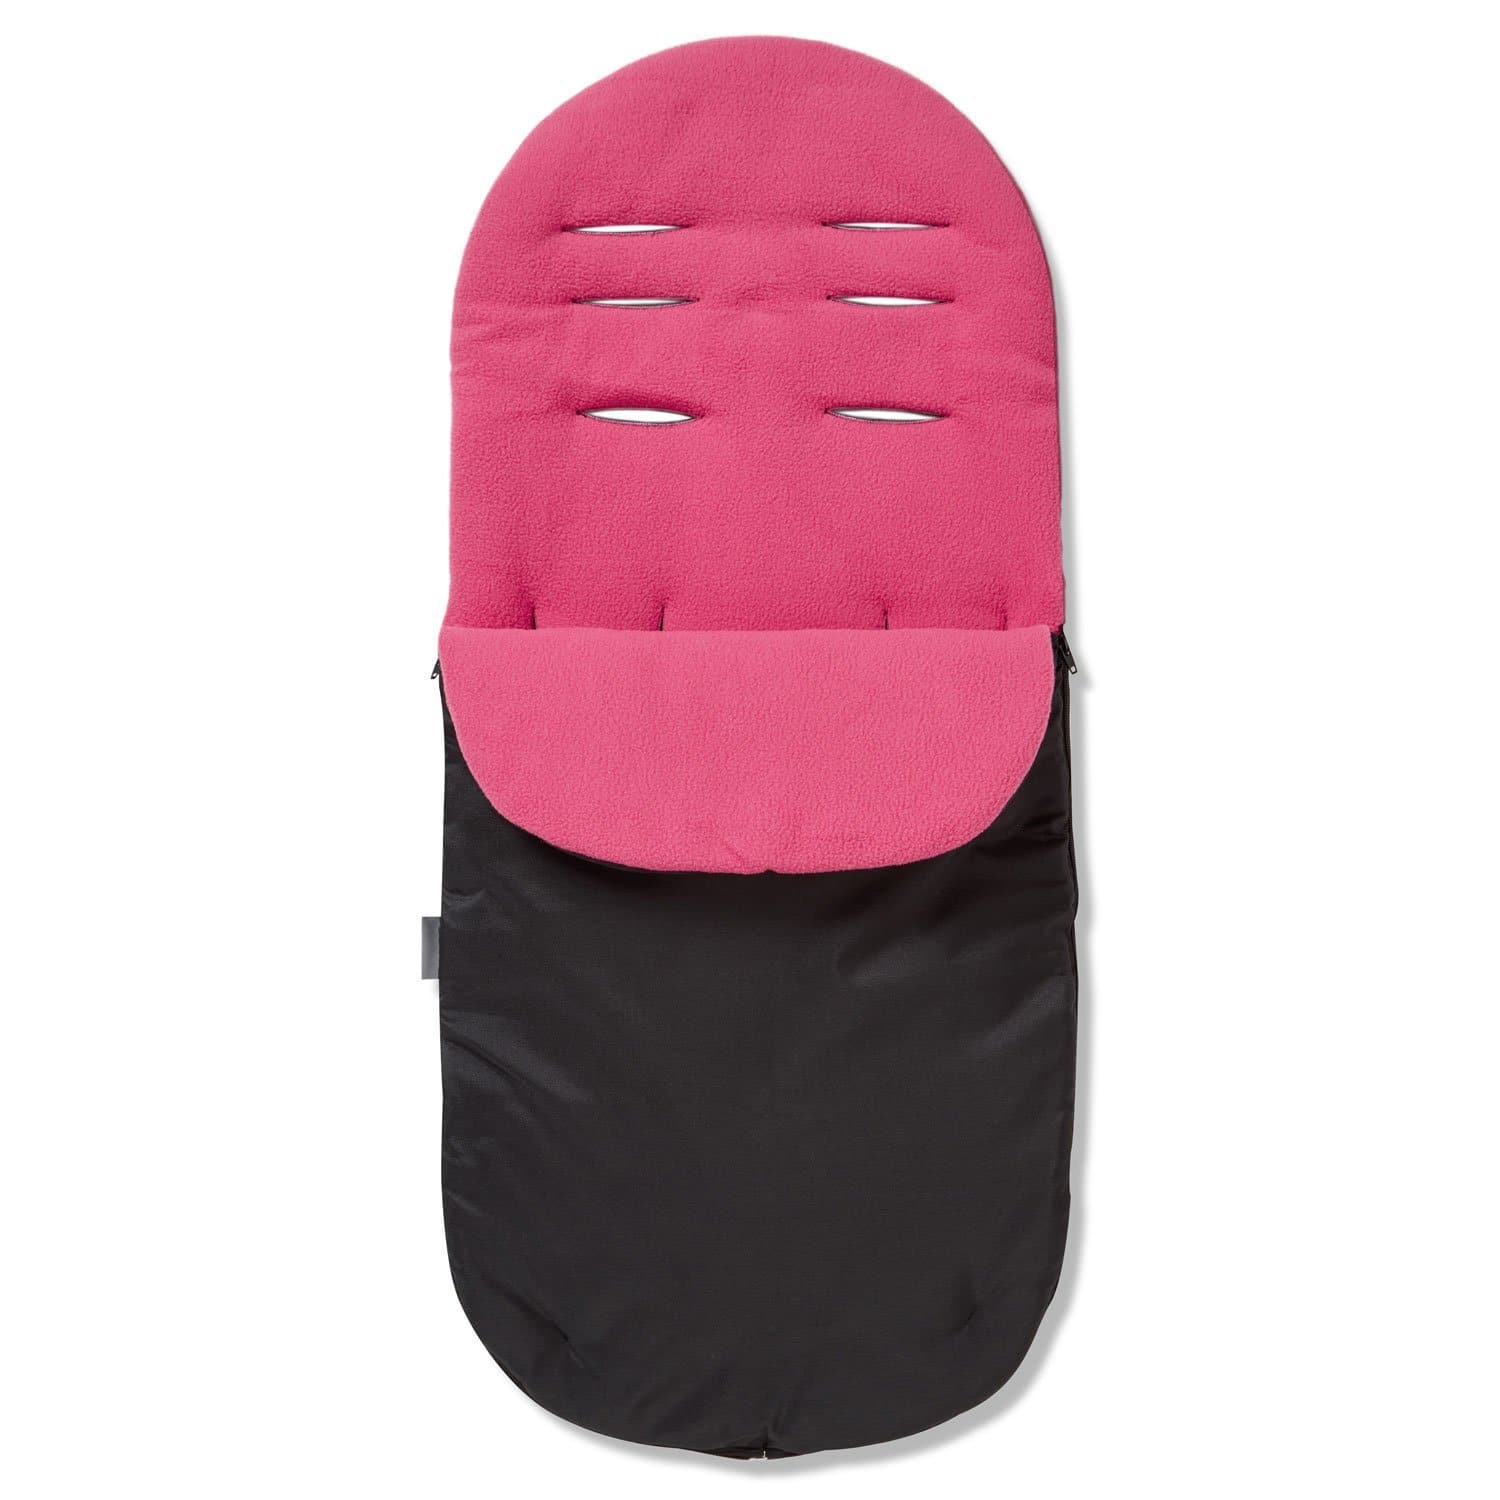 Footmuff / Cosy Toes Compatible with Jane - Dark Pink / Fits All Models | For Your Little One